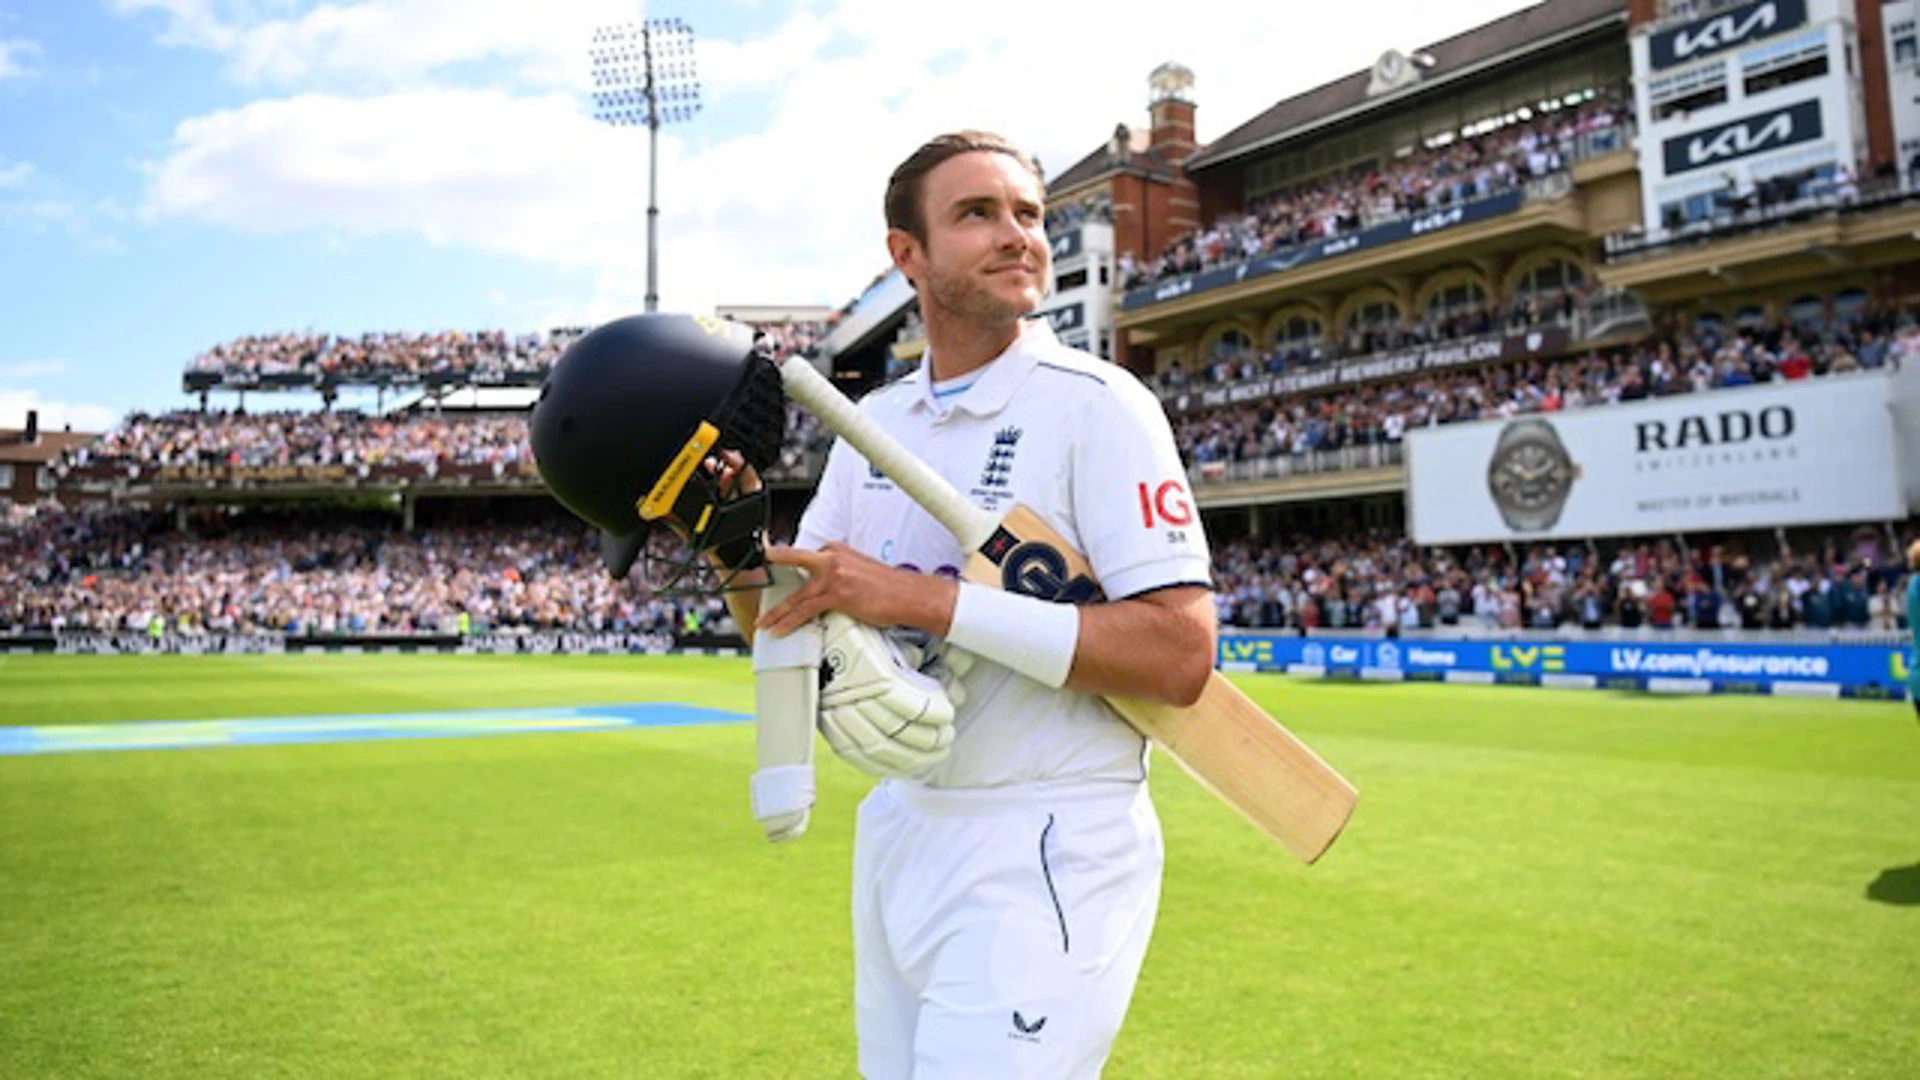 Broad to retire from cricket